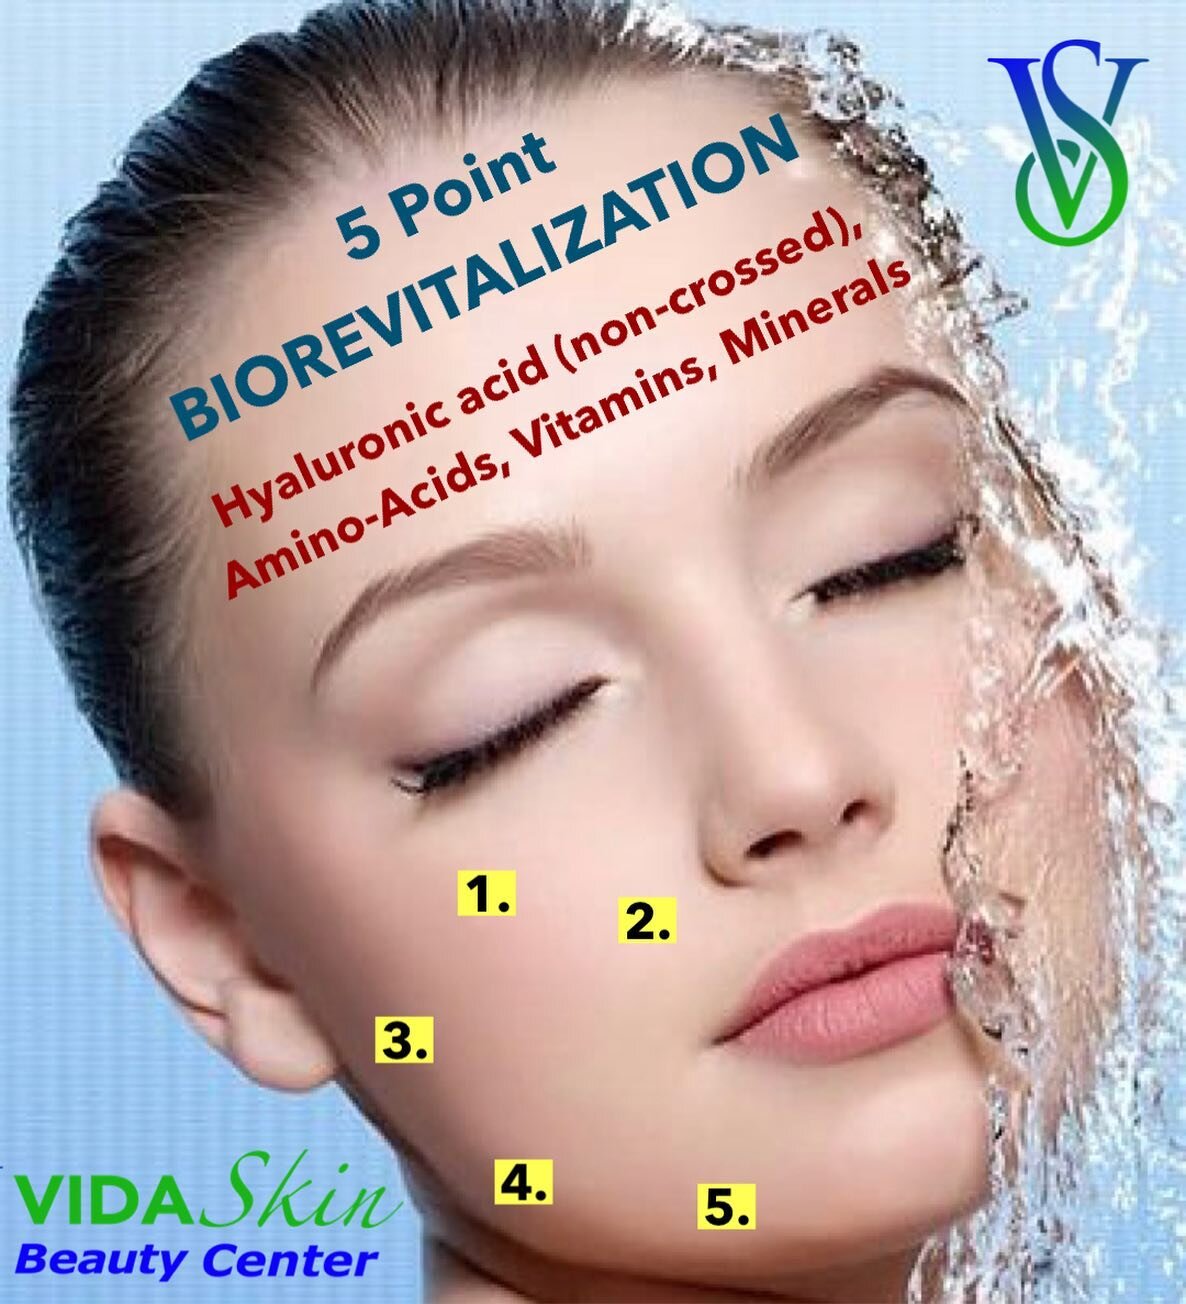 Biorevitalization - with 5 point Injections each side of face.
👇
MESOGOLD INCLUDES:
- Hyaluronic acid (non-crossed)
- 18 different Amino Acids
- 5 different Minerals
- 1 anti-aging peptide
- 1 Anti-oxidant
- Vitamin B2
👇
BENEFITS:
-Reduces wriknkle